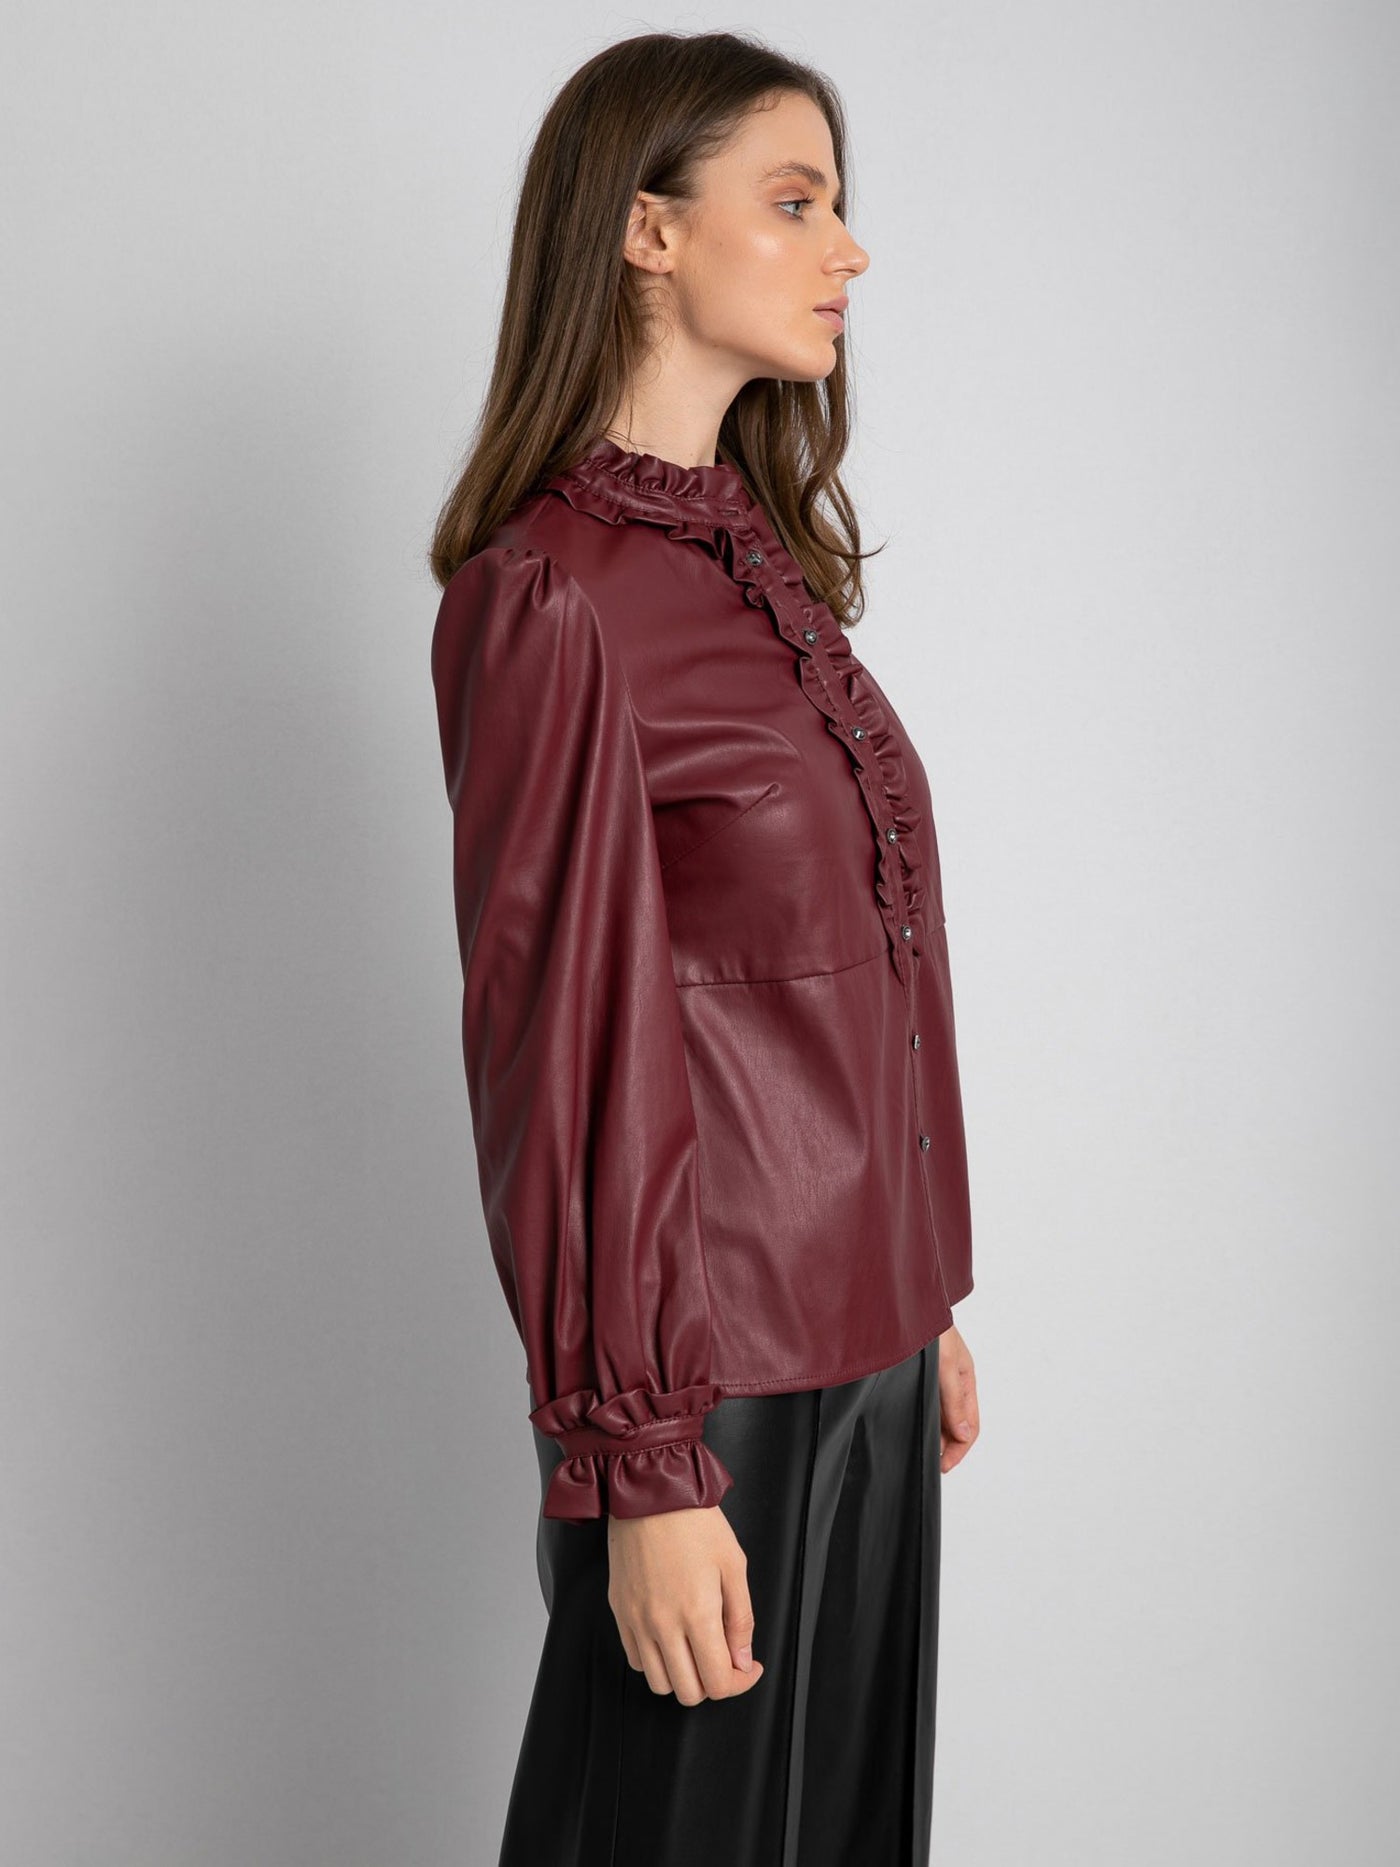 Leather Blouse - Front Ruffles